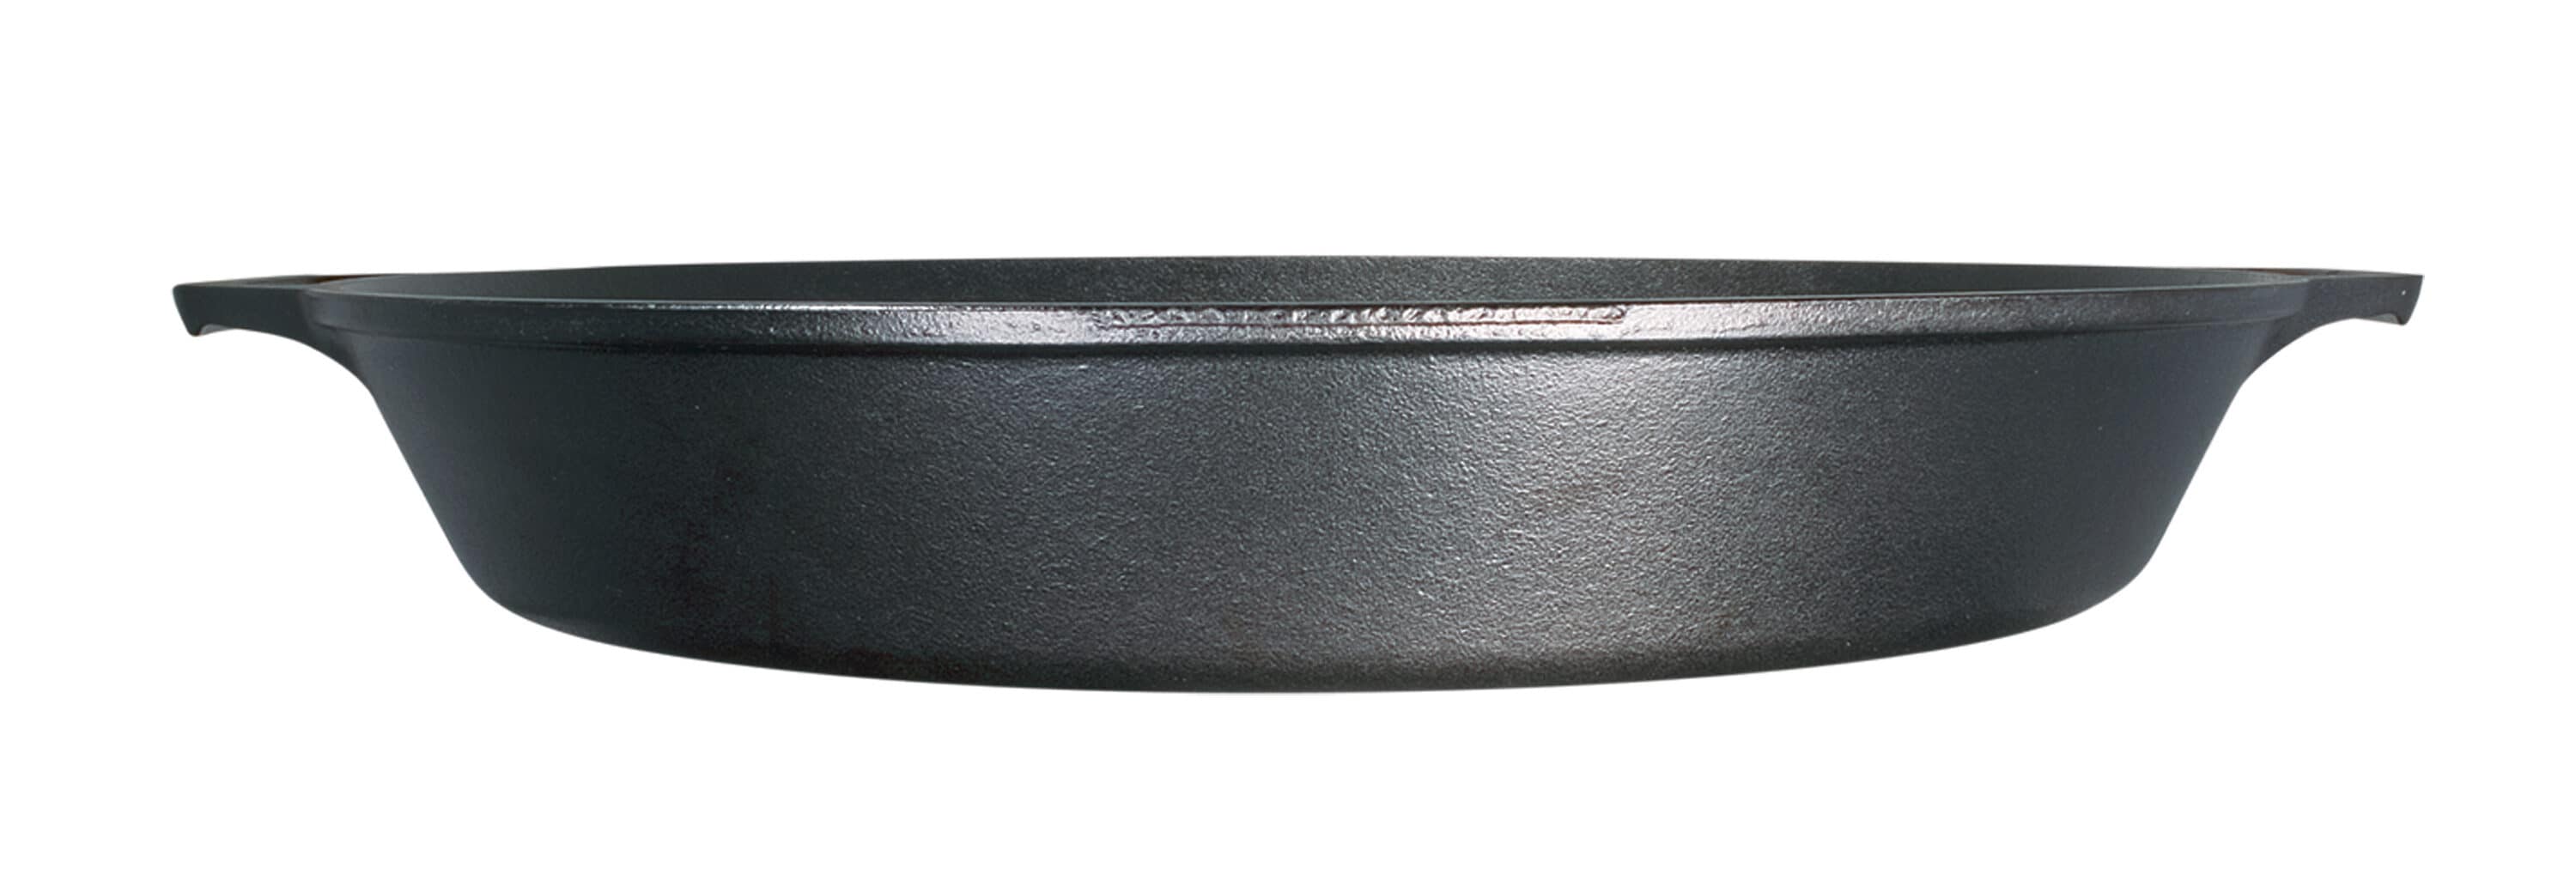 Lodge Cast Iron Skillet - 17-in. L17SK3